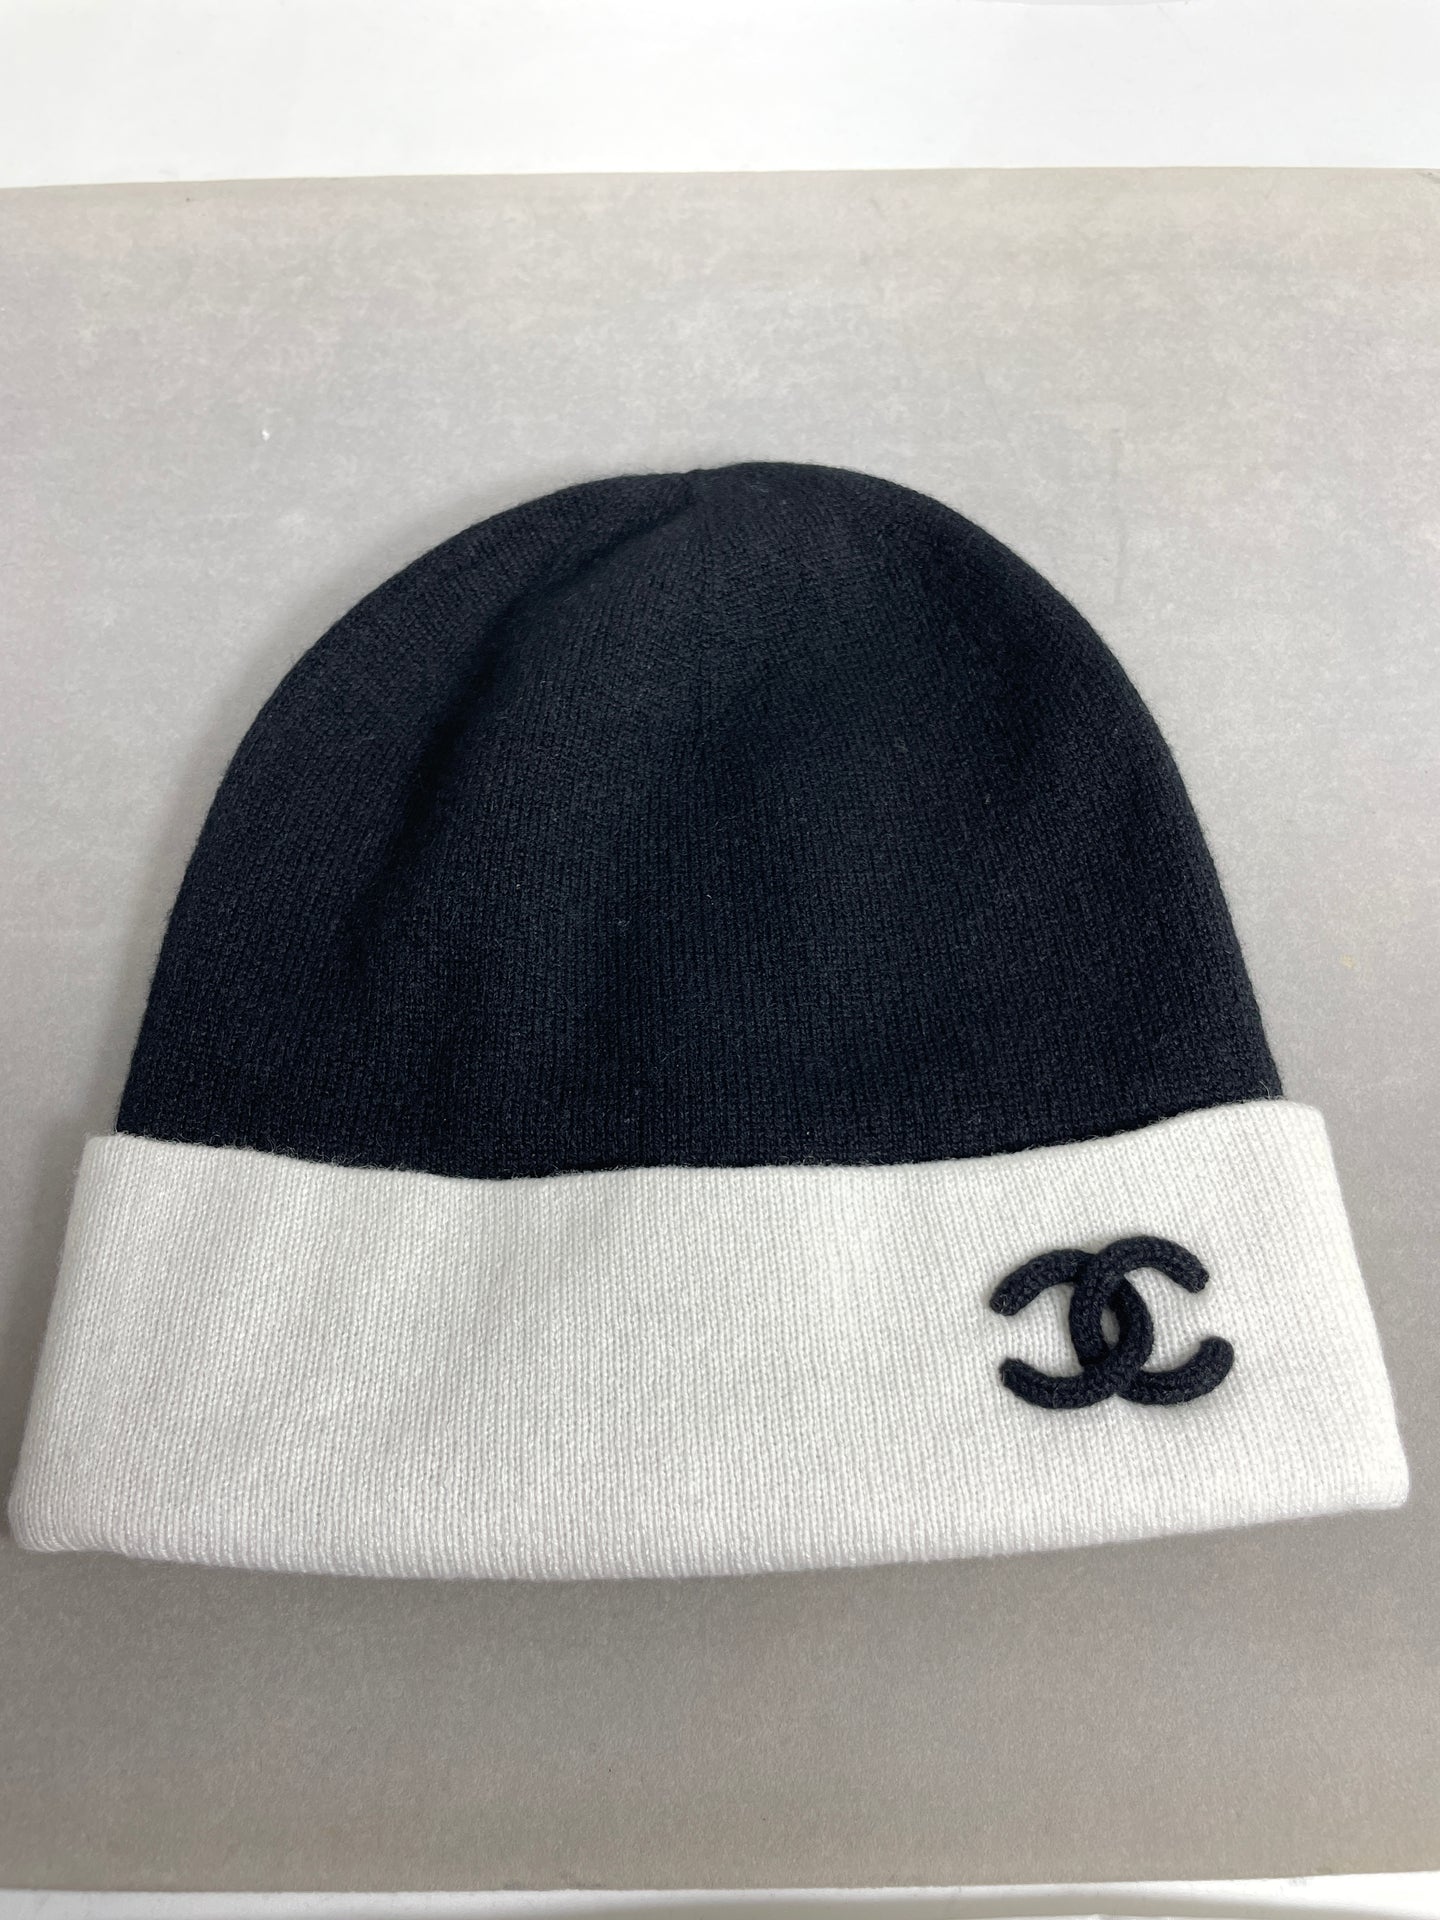 Chanel Black Cashmere With White Trim Hat